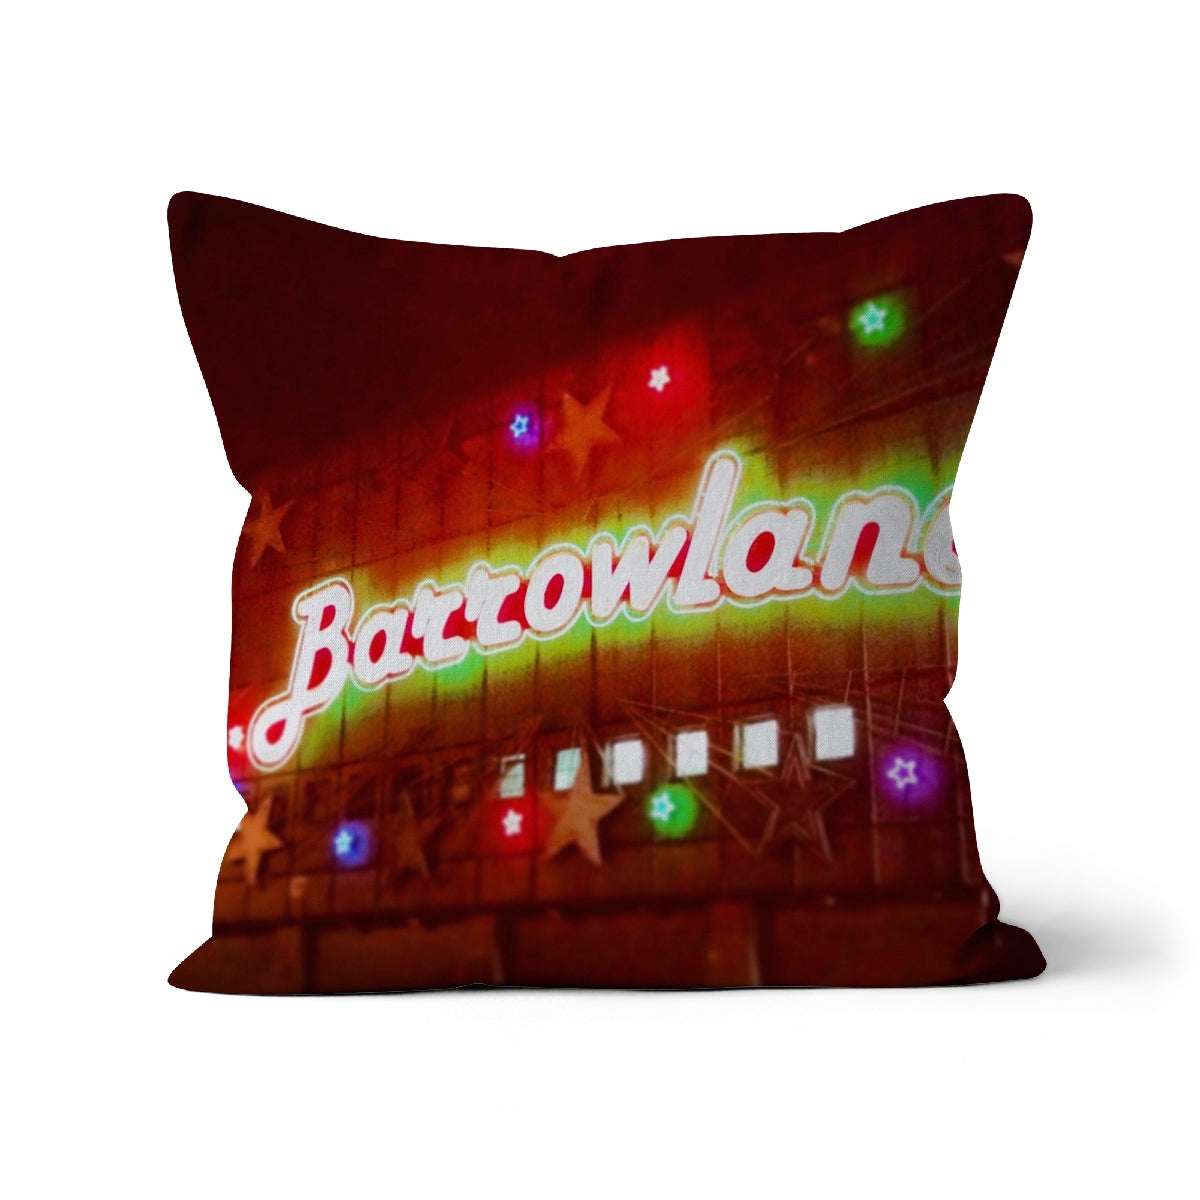 A Neon Glasgow Barrowlands Art Gifts Cushion-Cushions-Edinburgh & Glasgow Art Gallery-Faux Suede-18"x18"-Paintings, Prints, Homeware, Art Gifts From Scotland By Scottish Artist Kevin Hunter